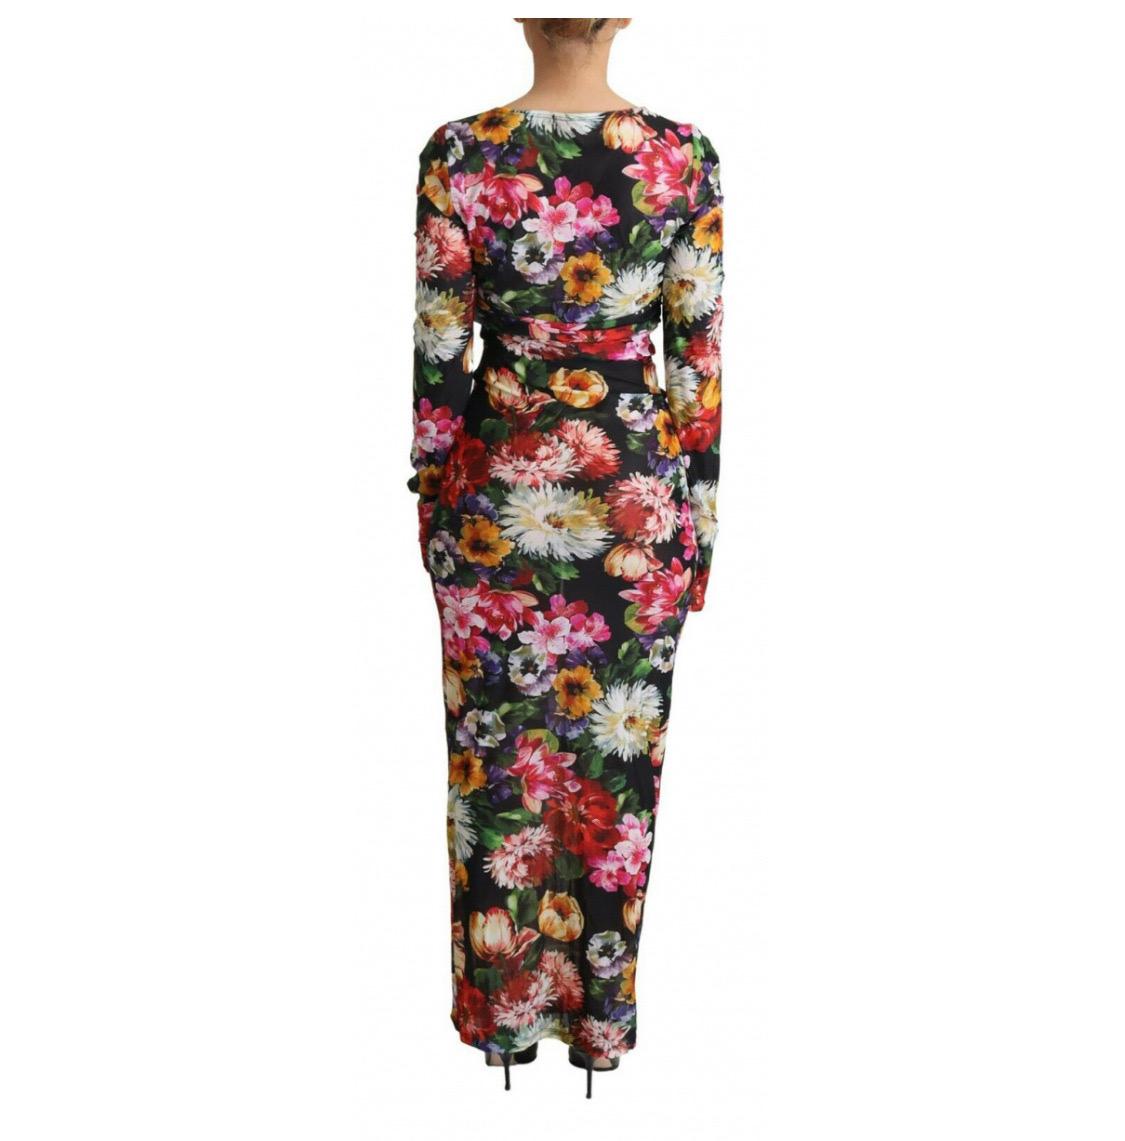 Women's Dolce & Gabbana
Colorful sheer maxi multicolor floral dress